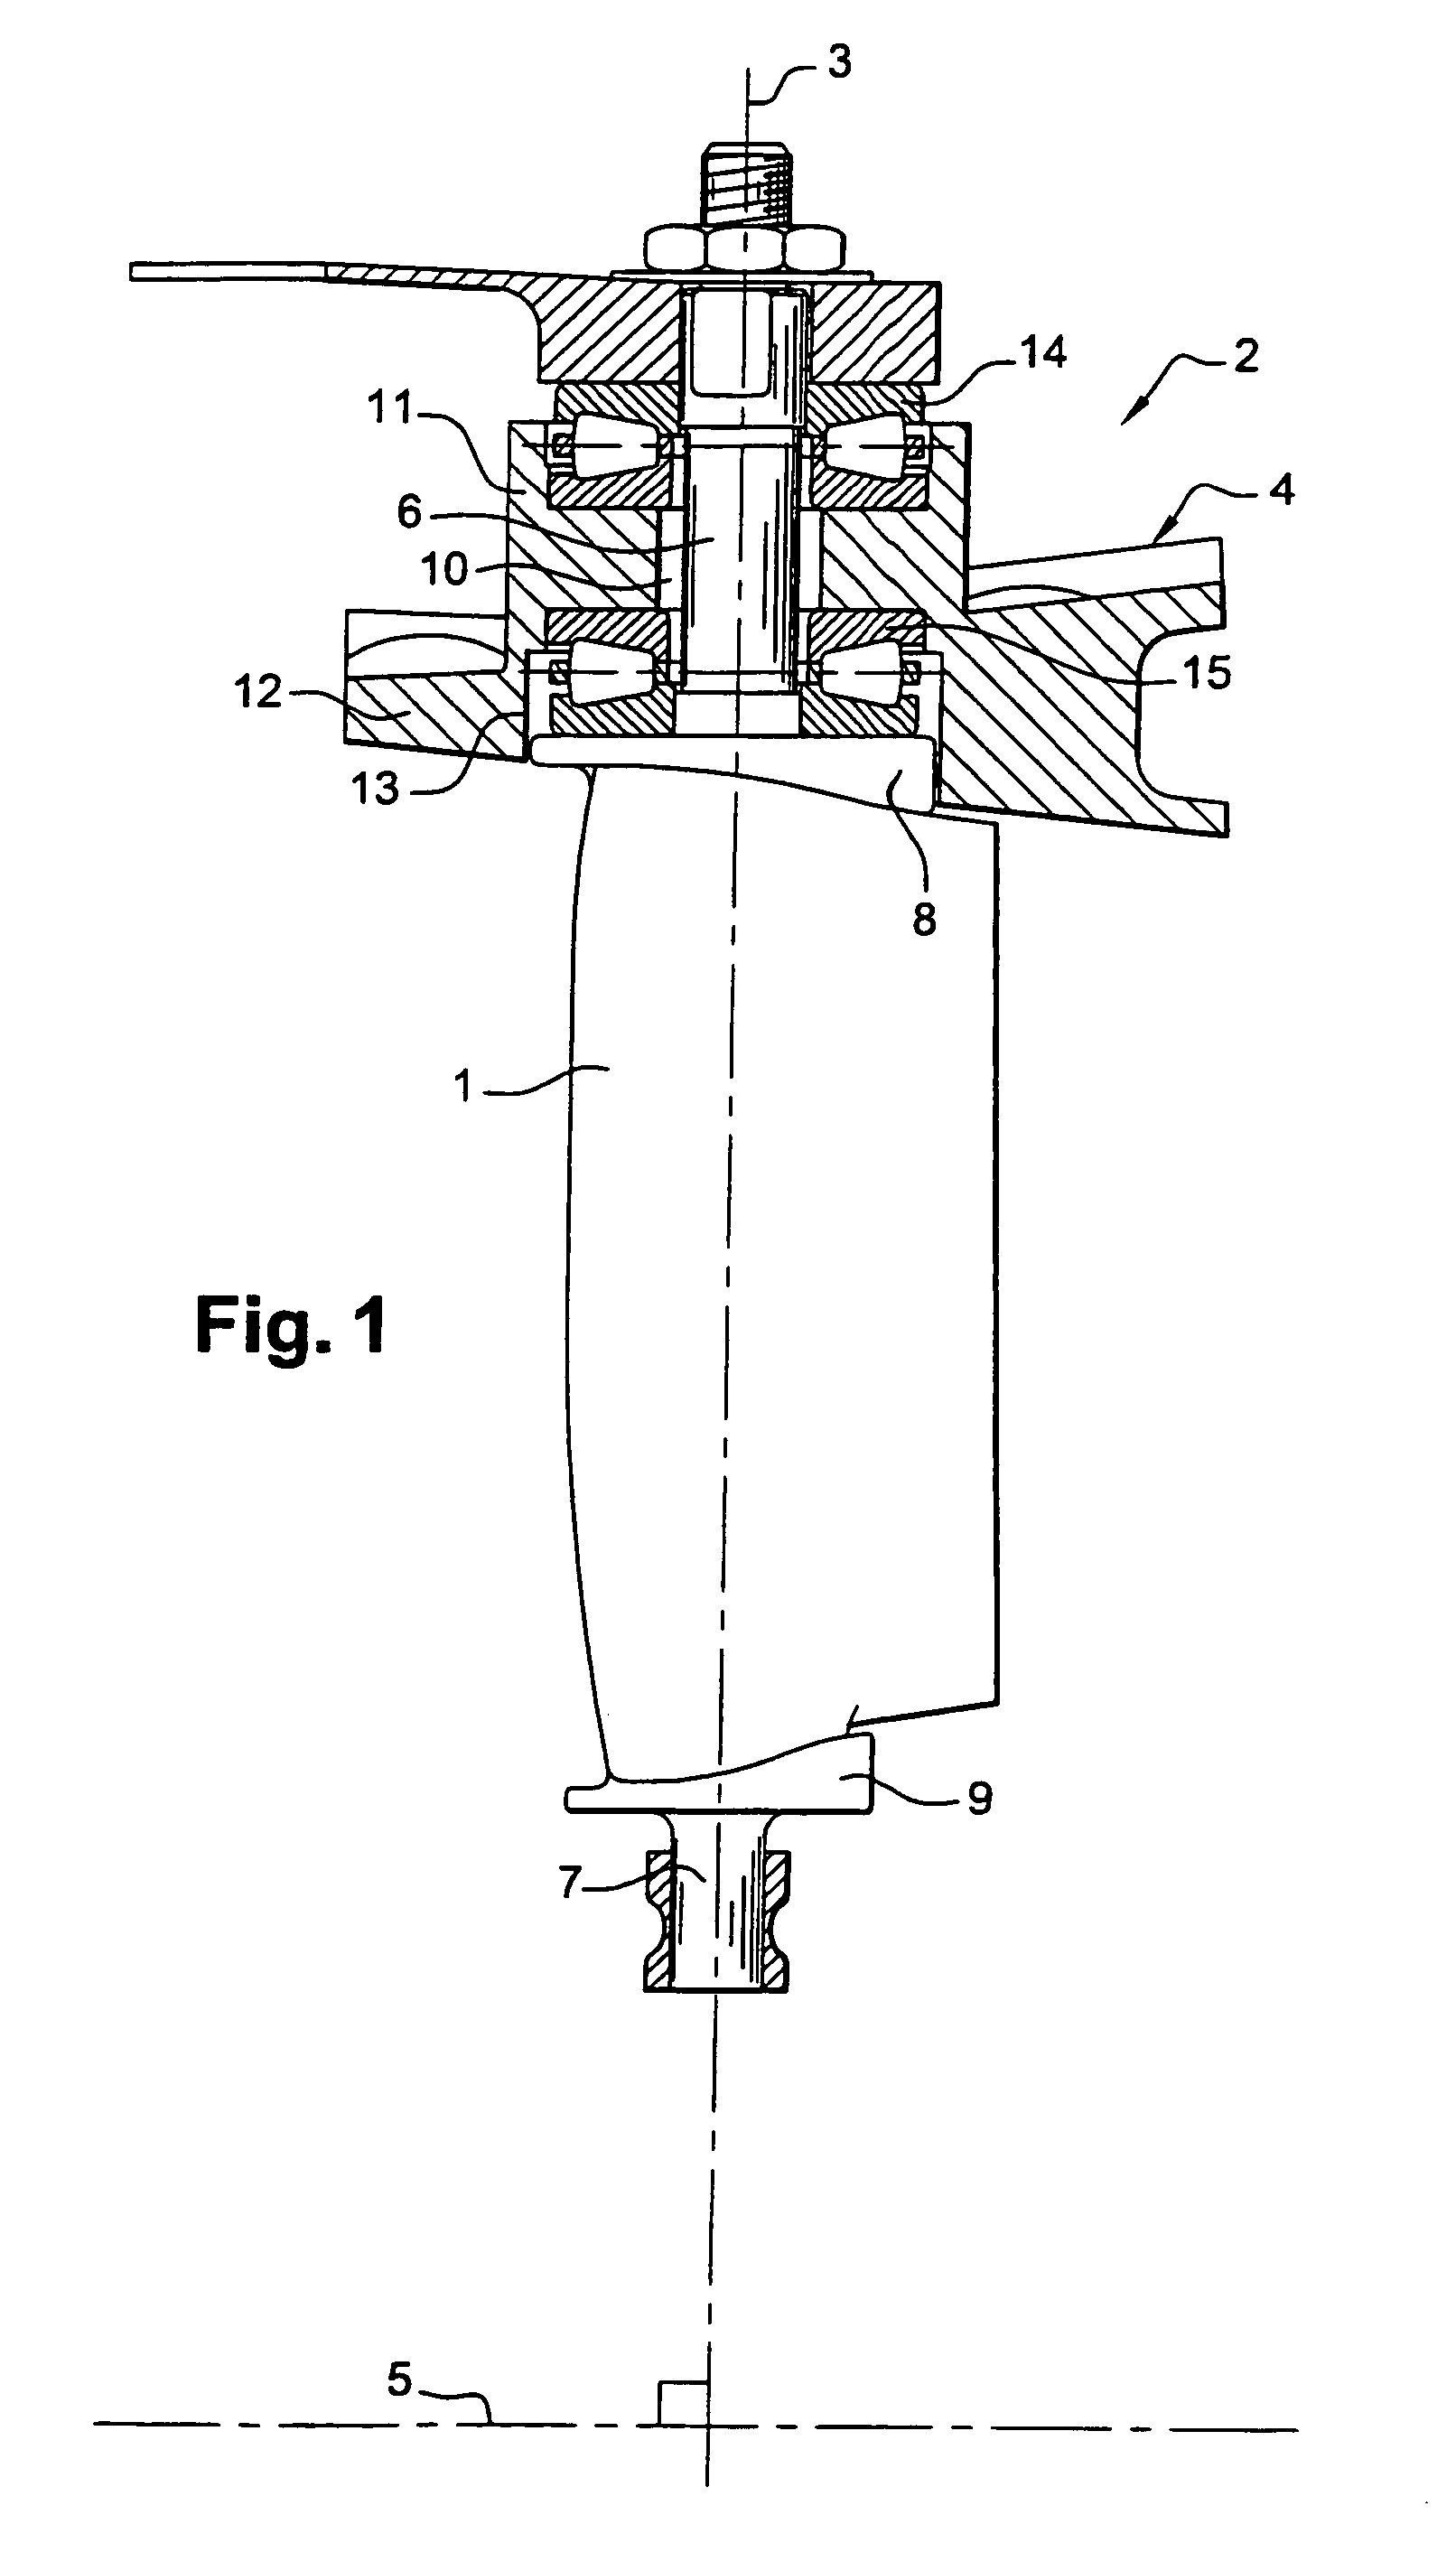 Method of guiding a blade having a variable pitch angle